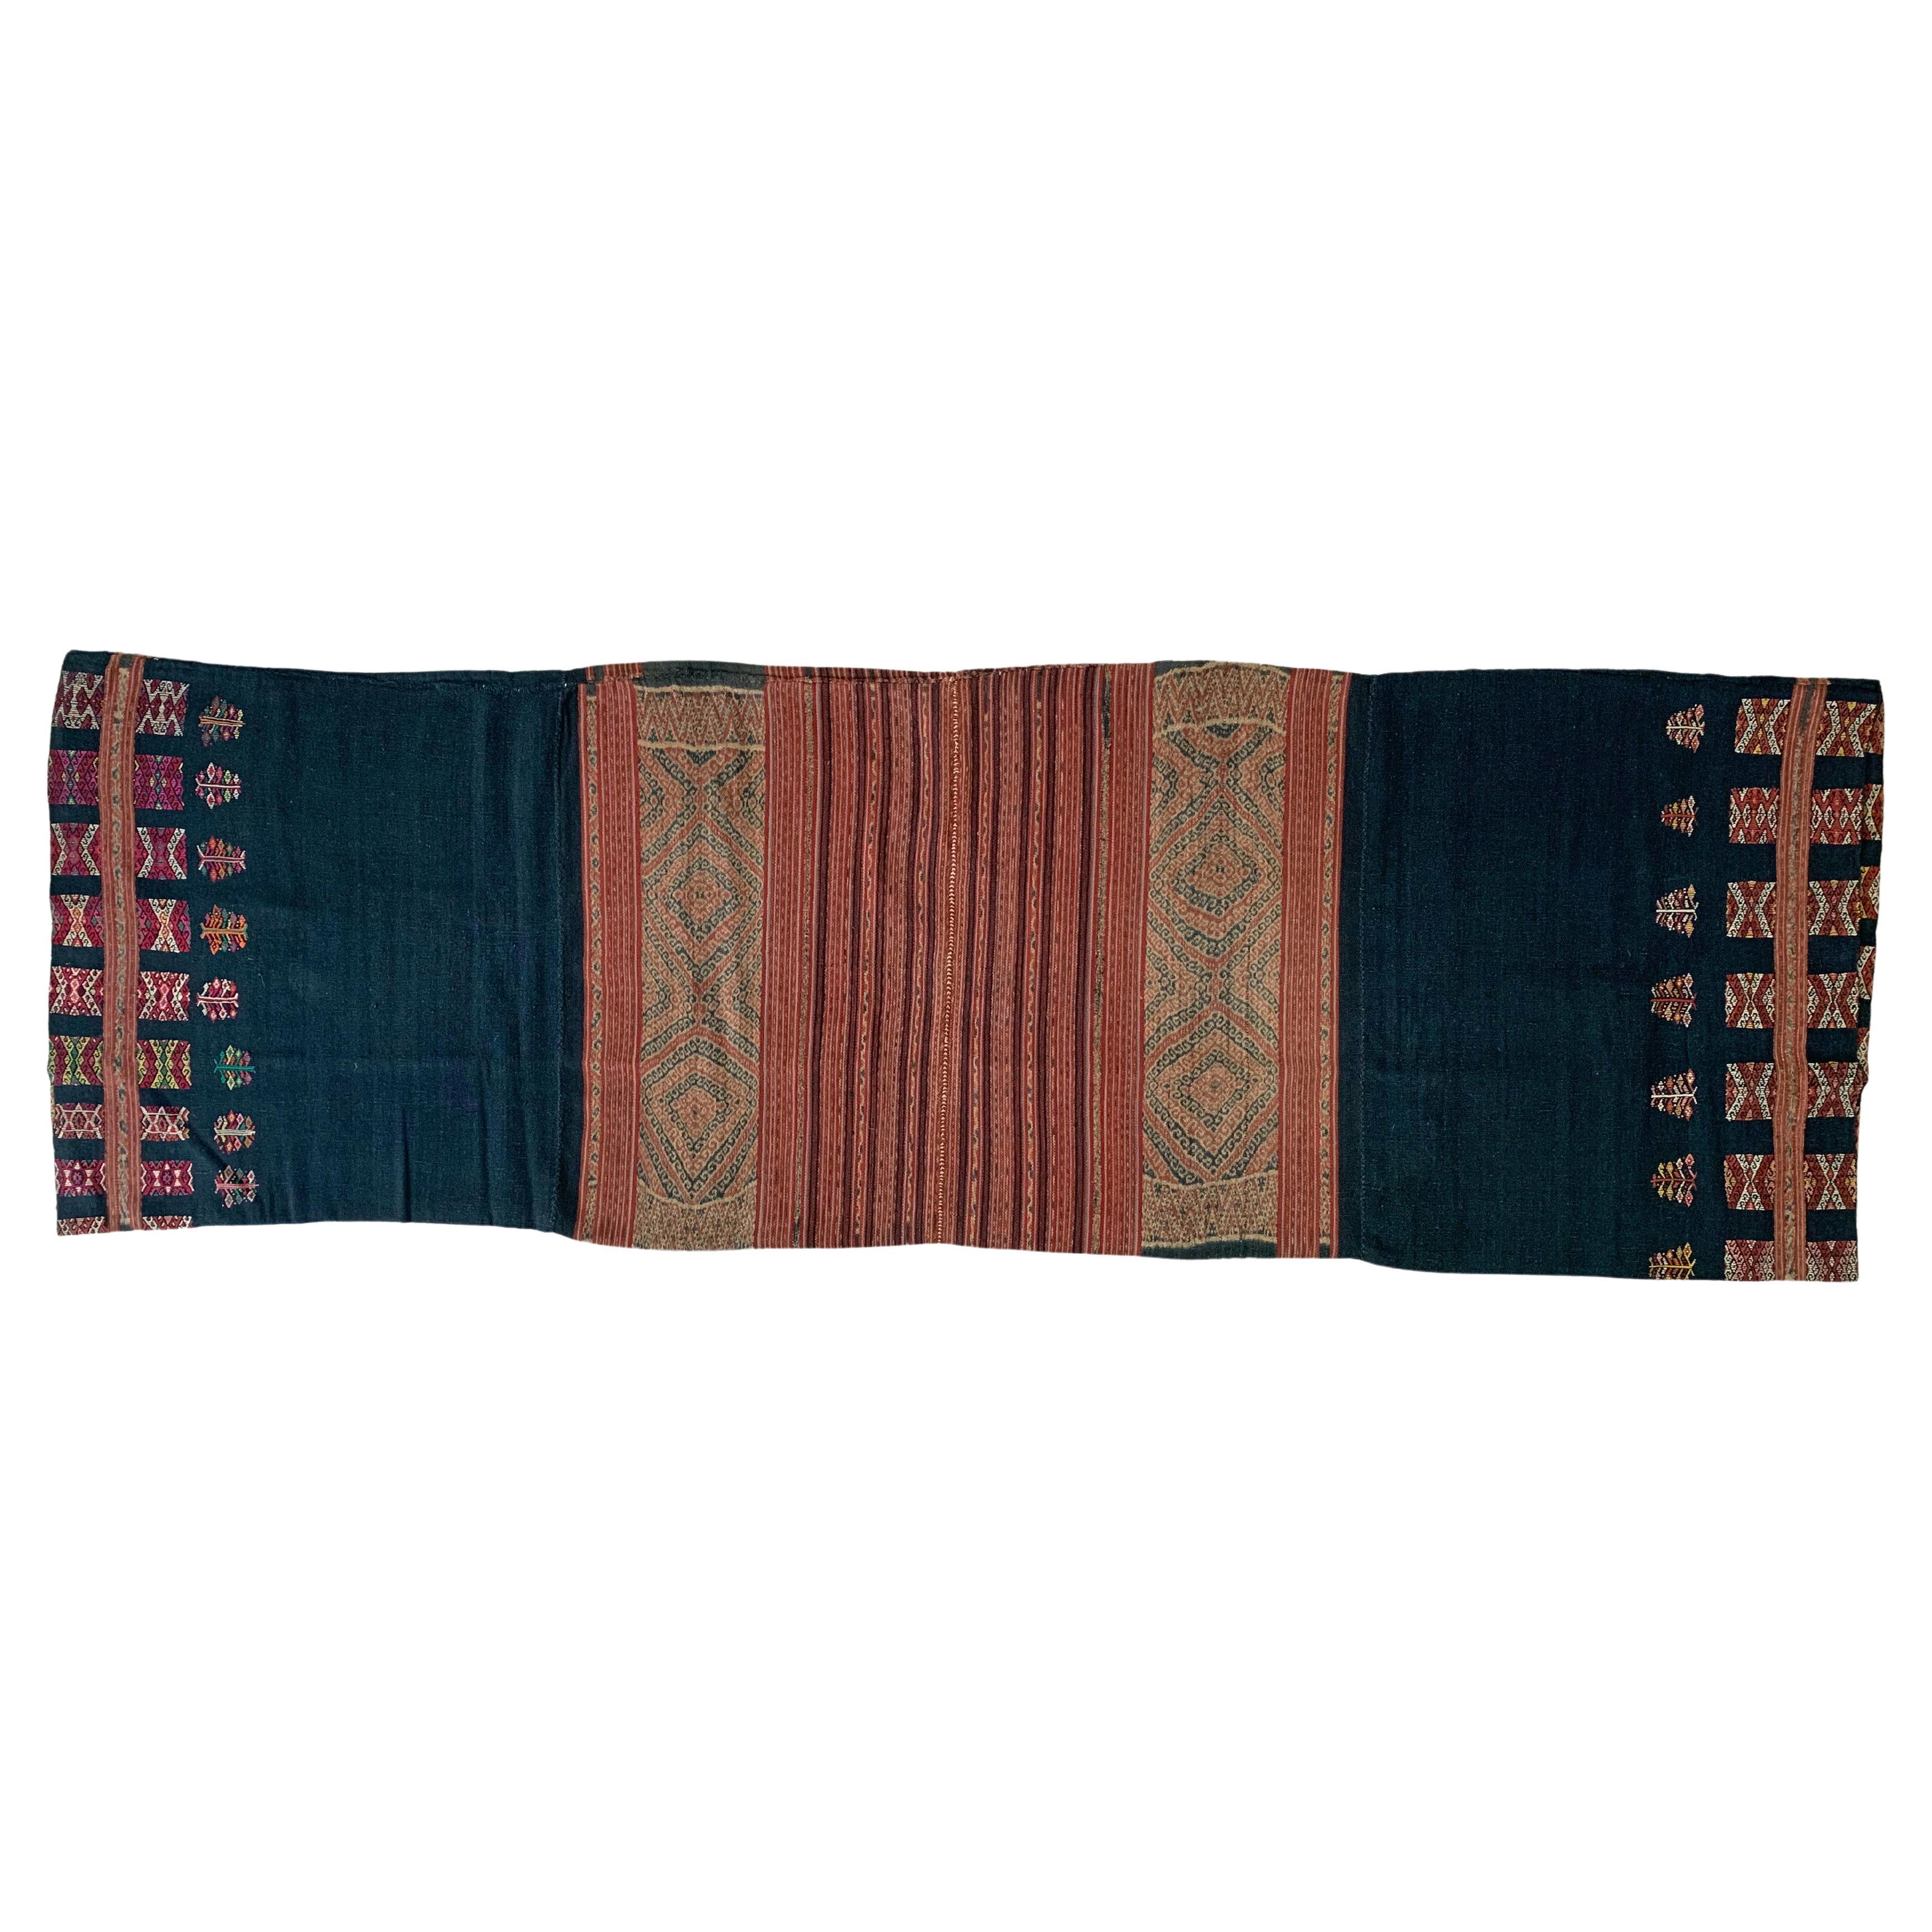 Ikat Textile from Flores Island, Indonesia For Sale at 1stDibs